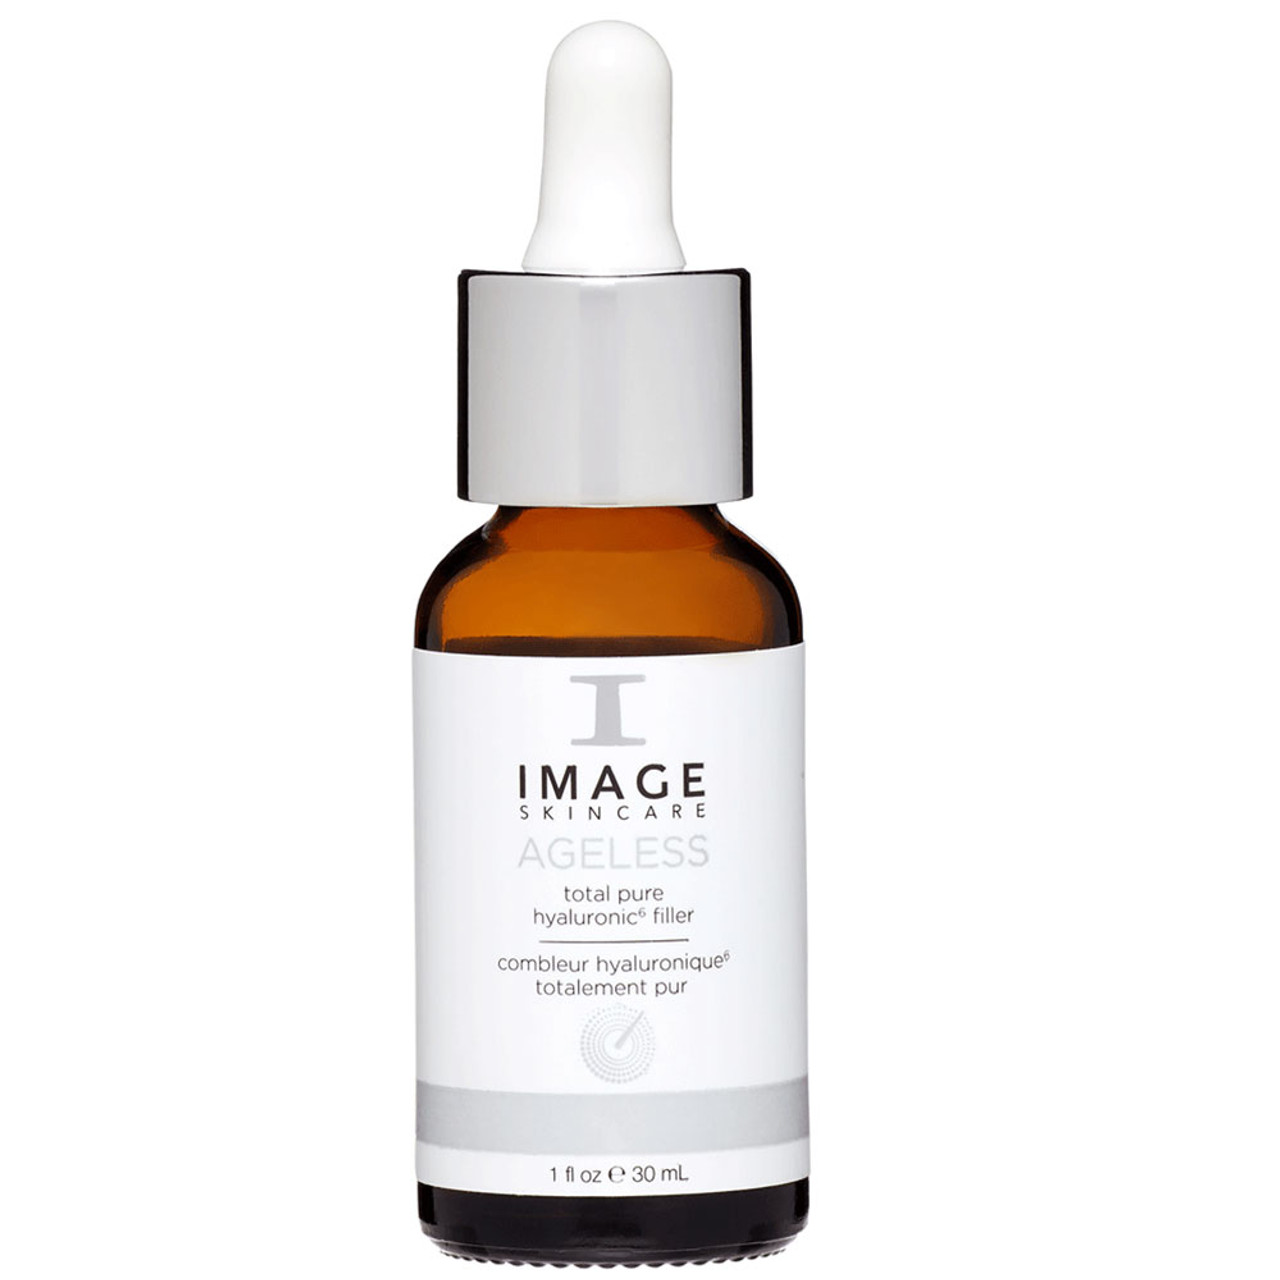 IMAGE Skincare AGELESS Total Pure Hyaluronic Filler BeautifiedYou.com